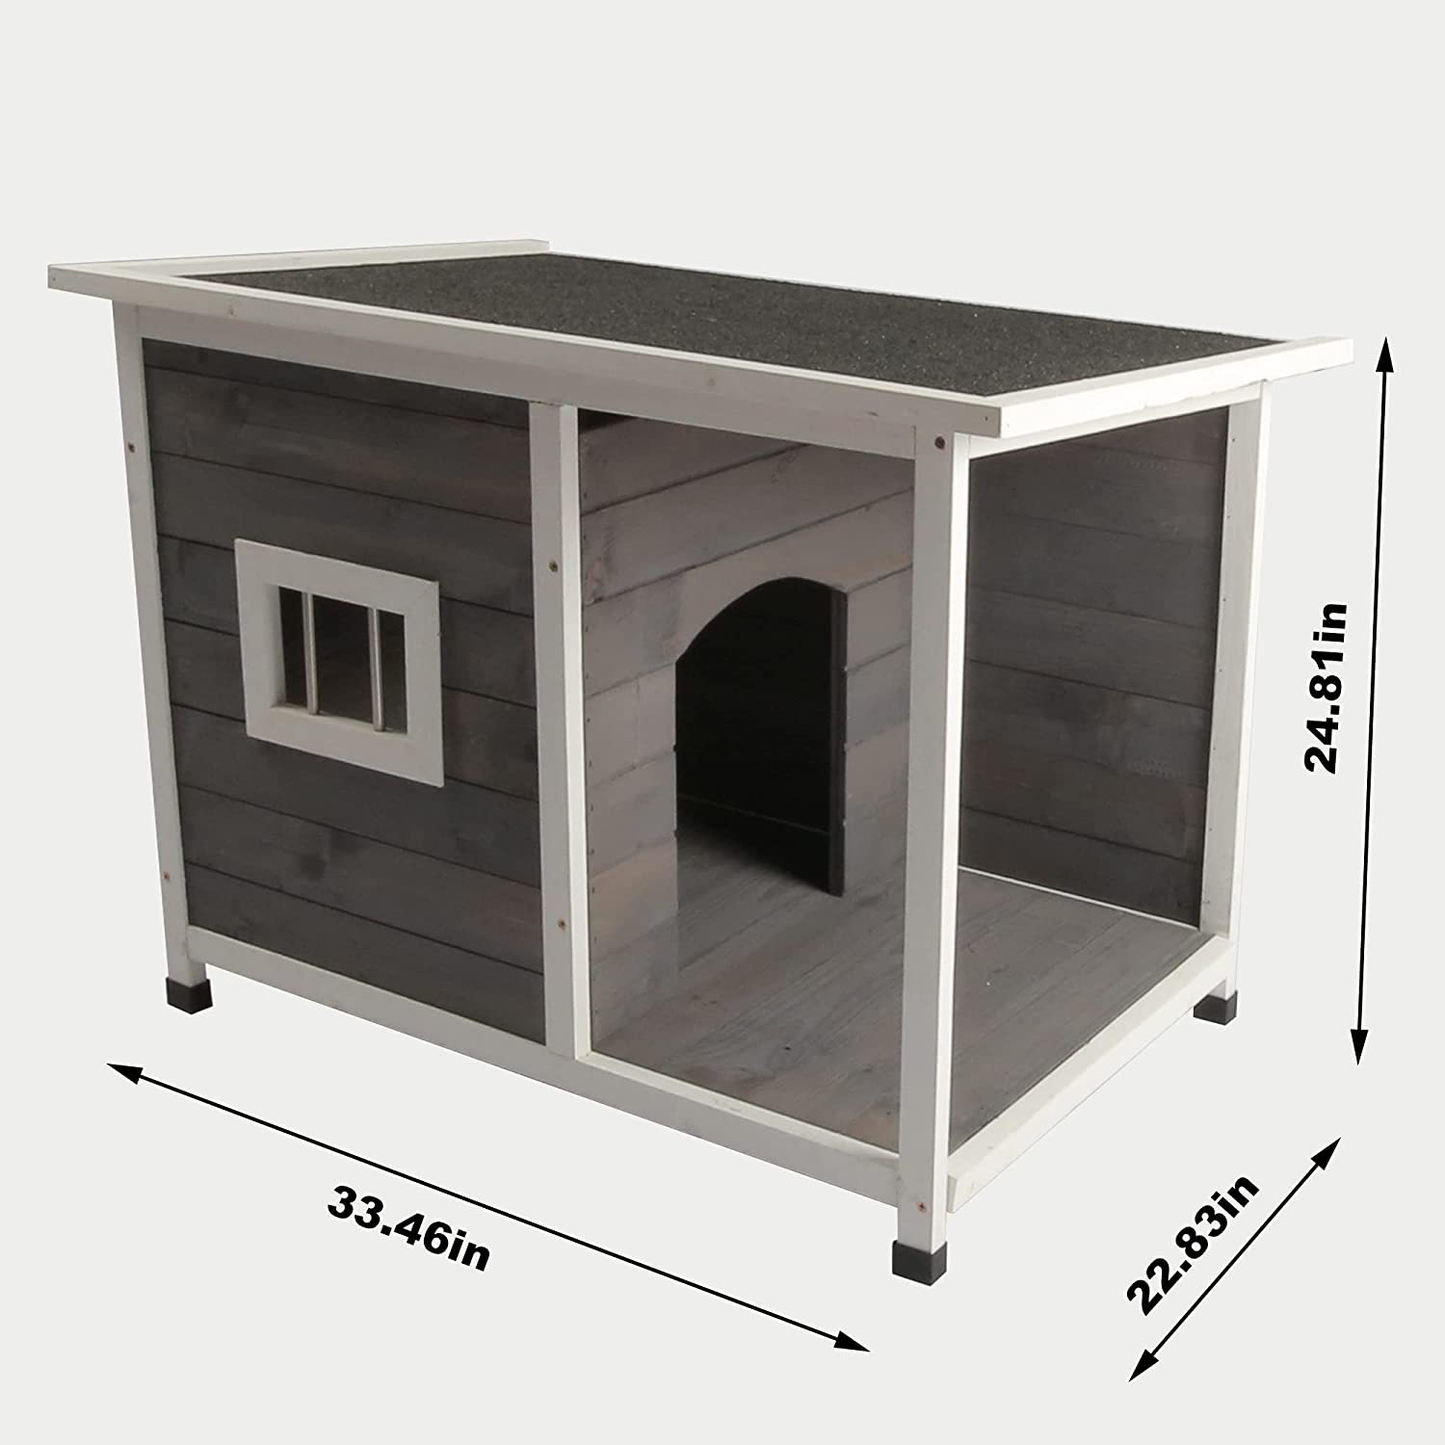 LASBAK Wood Dog Houses Outdoor Insulated, Weatherproof Doghouse Weather Waterproof Dog Kennel with Flip-Up Roof and Window, Indoor Outdoor, Medium Dog, Nature